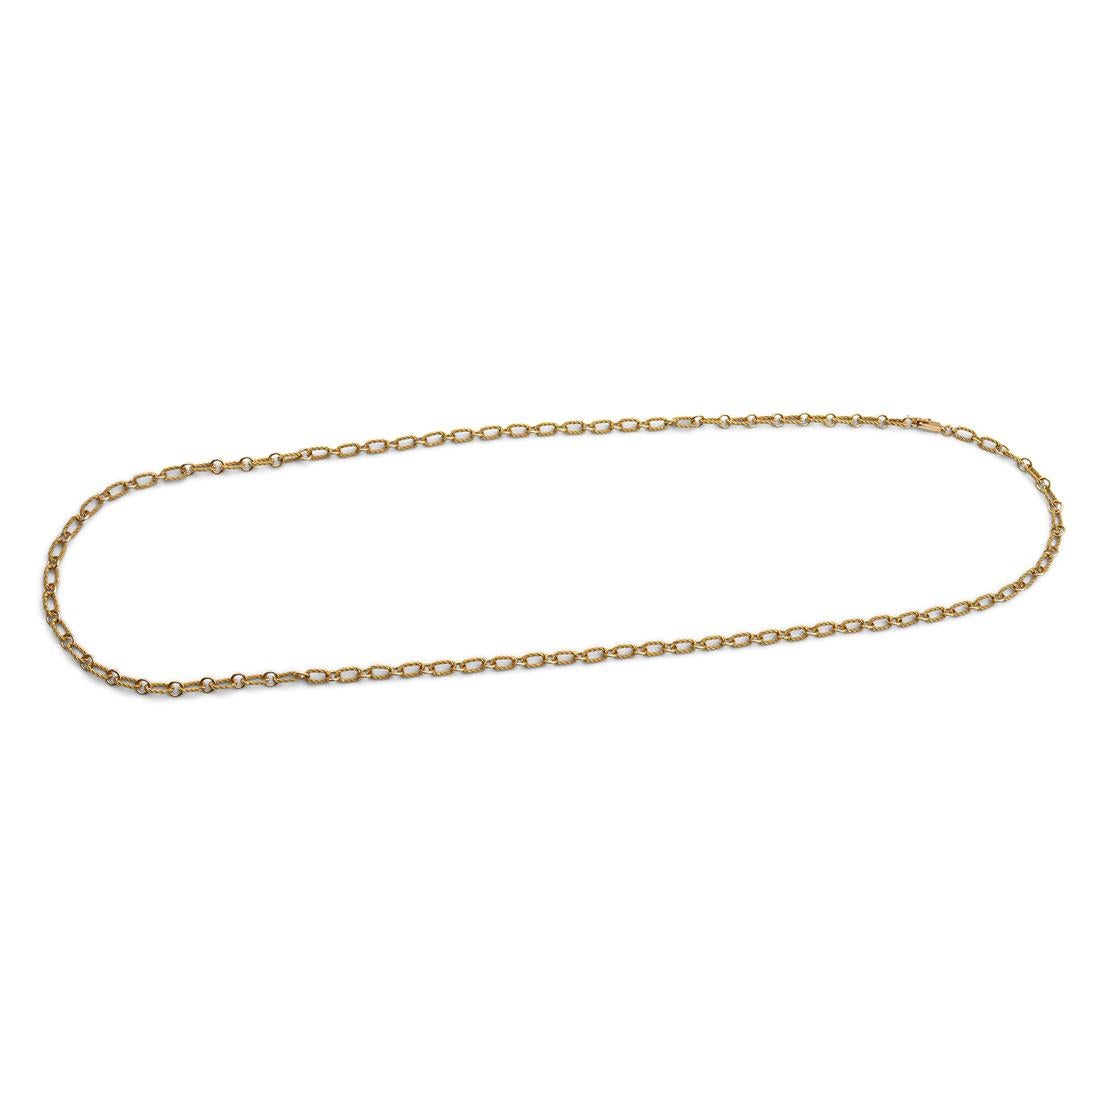 Women's or Men's Gold Rope Link Chain Necklace